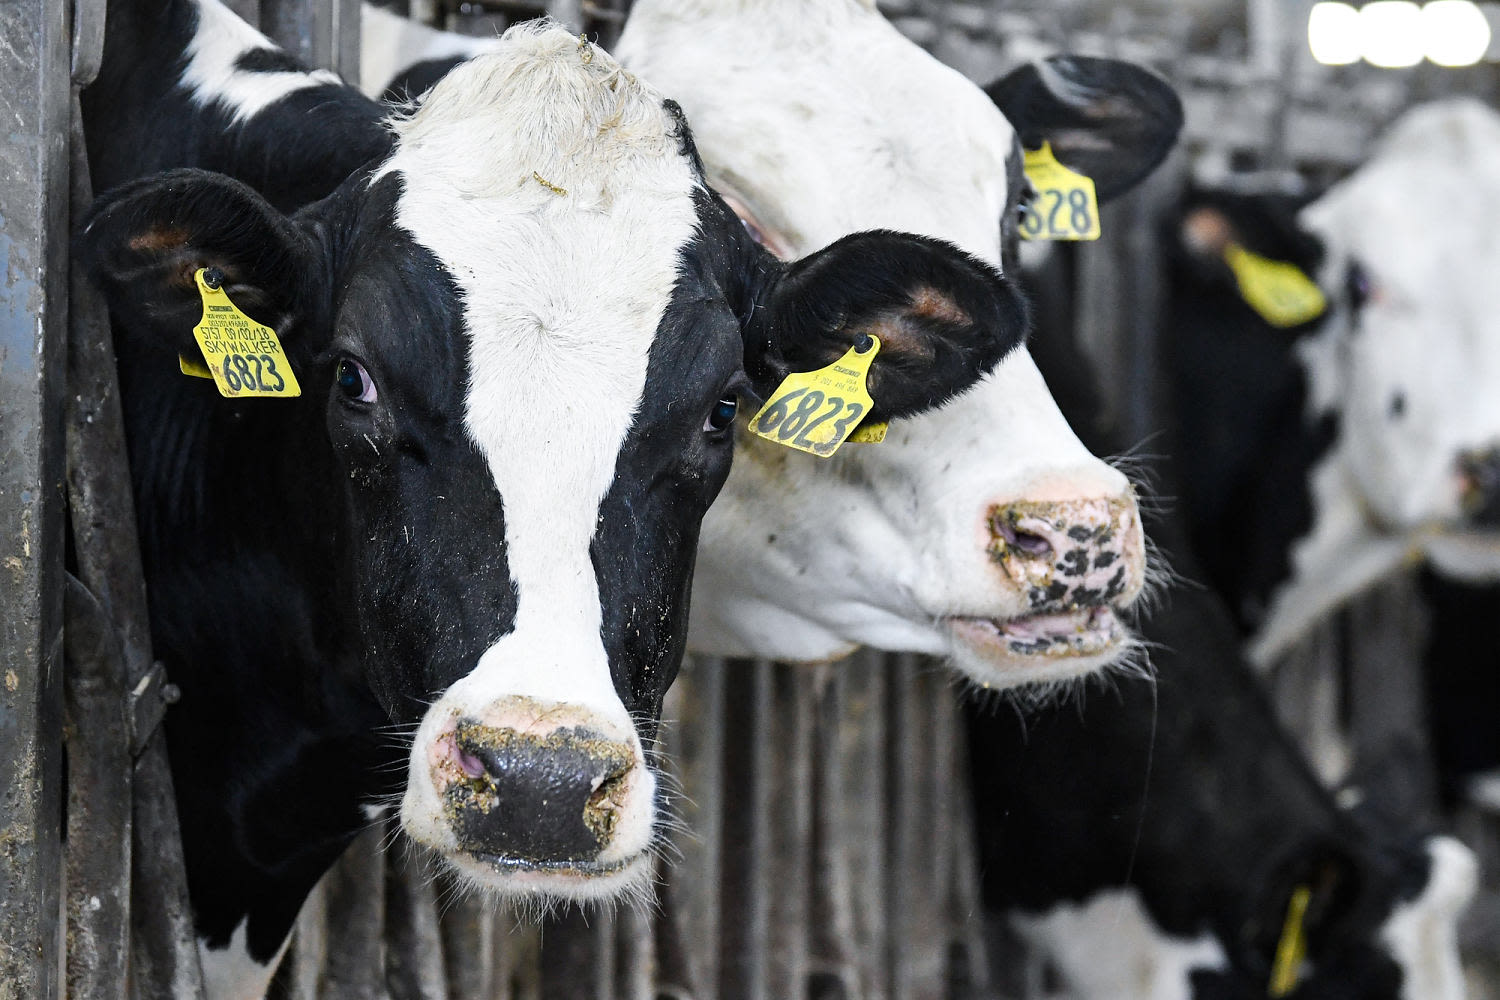 Research on bird flu in cows shows how efficiently it has spread among mammals